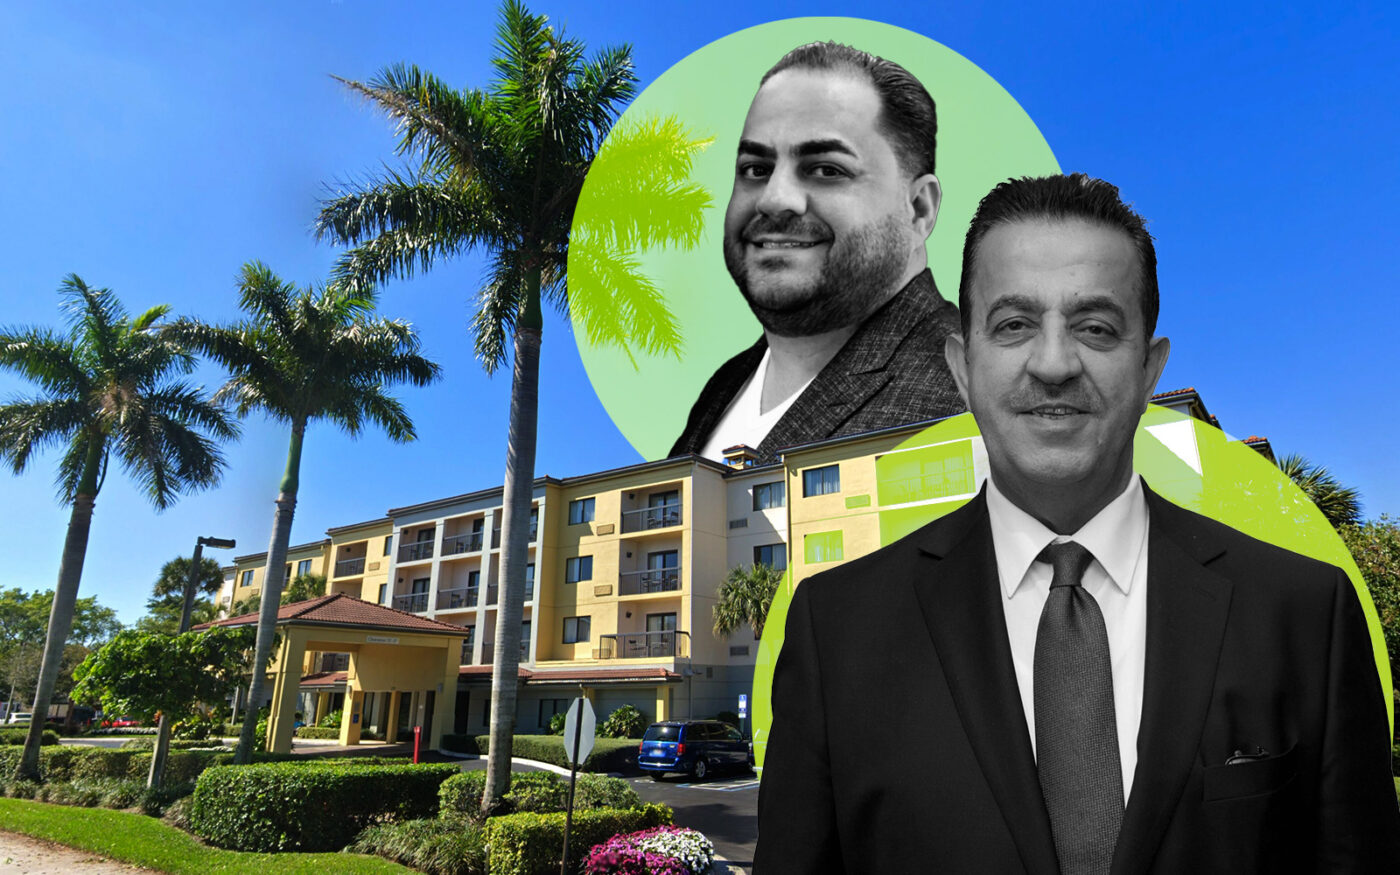 MHS Group’s Malik Abdulnoor and Thrive Hospitality Group’s Sahir Malki with the Courtyard by Marriott at 620 North University Drive in Coral Springs